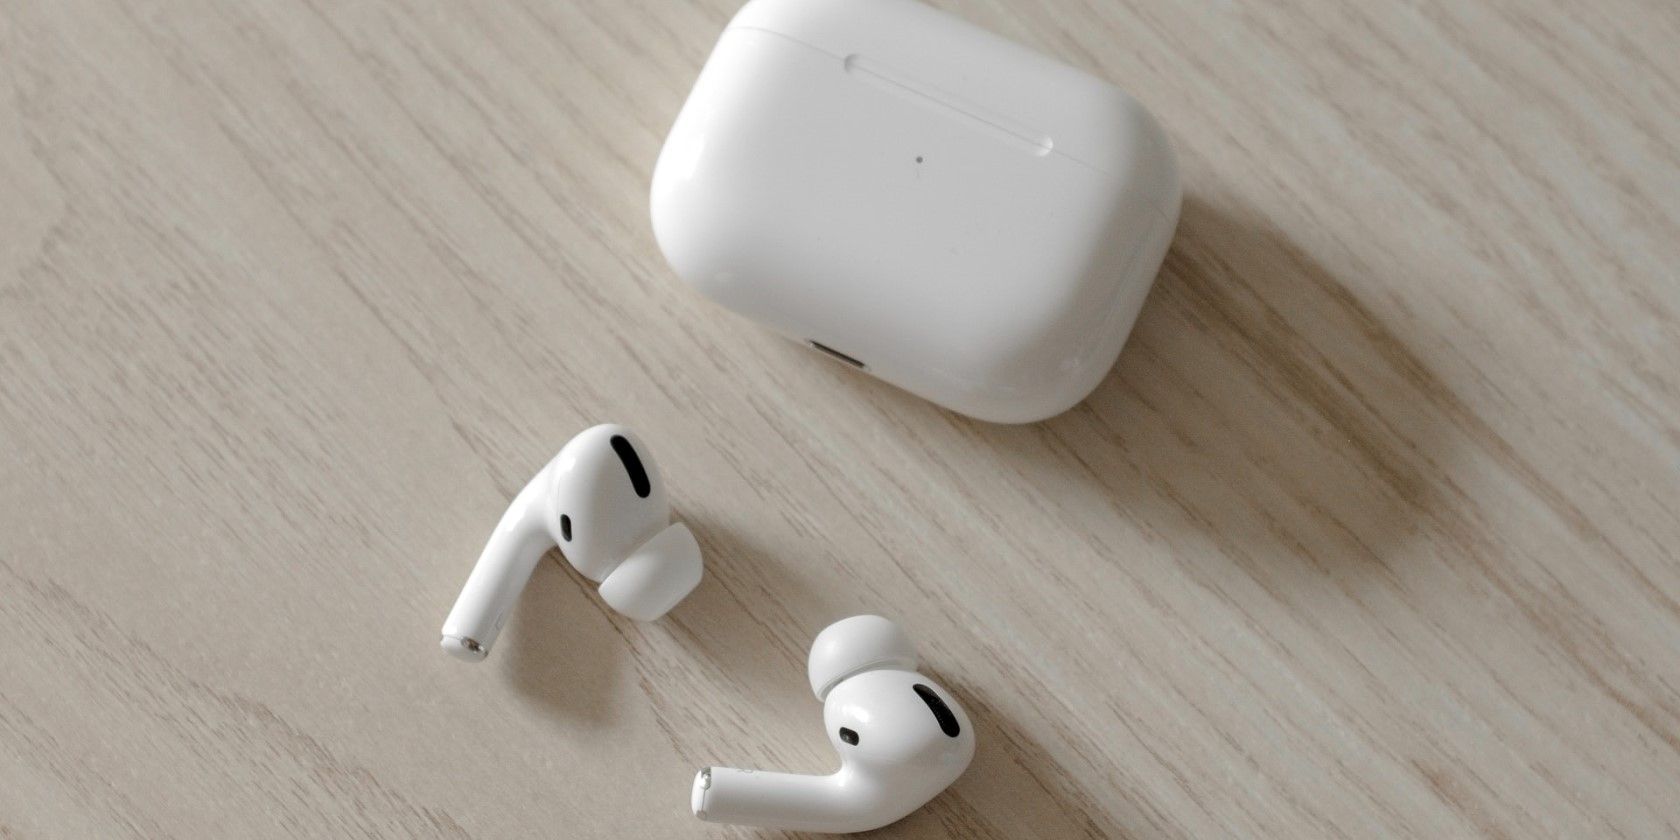 Apple Airpods Pro Black Friday